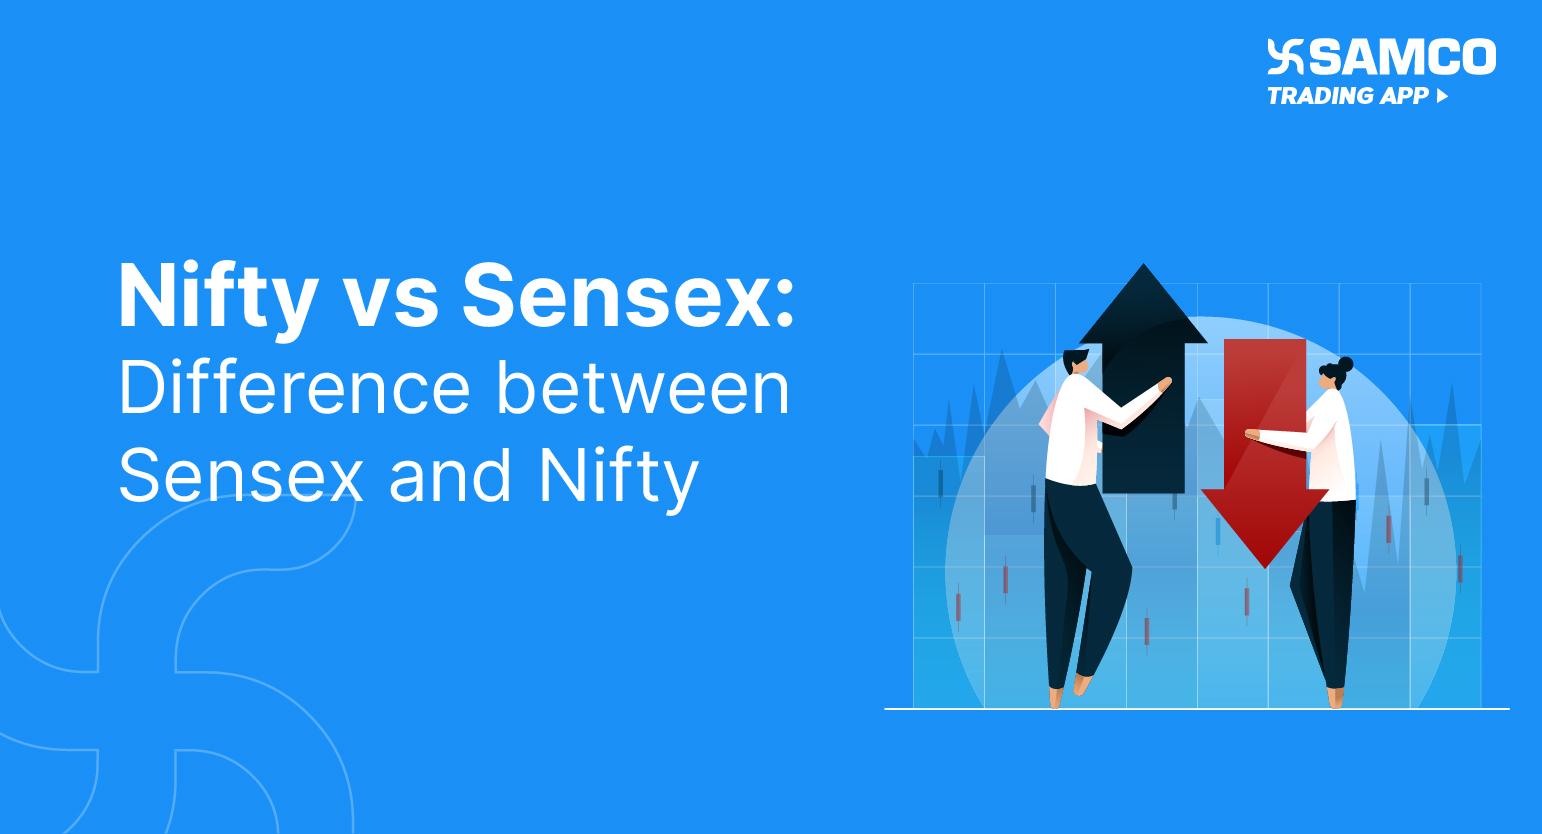 Nifty vs Sensex: Difference between Sensex and Nifty